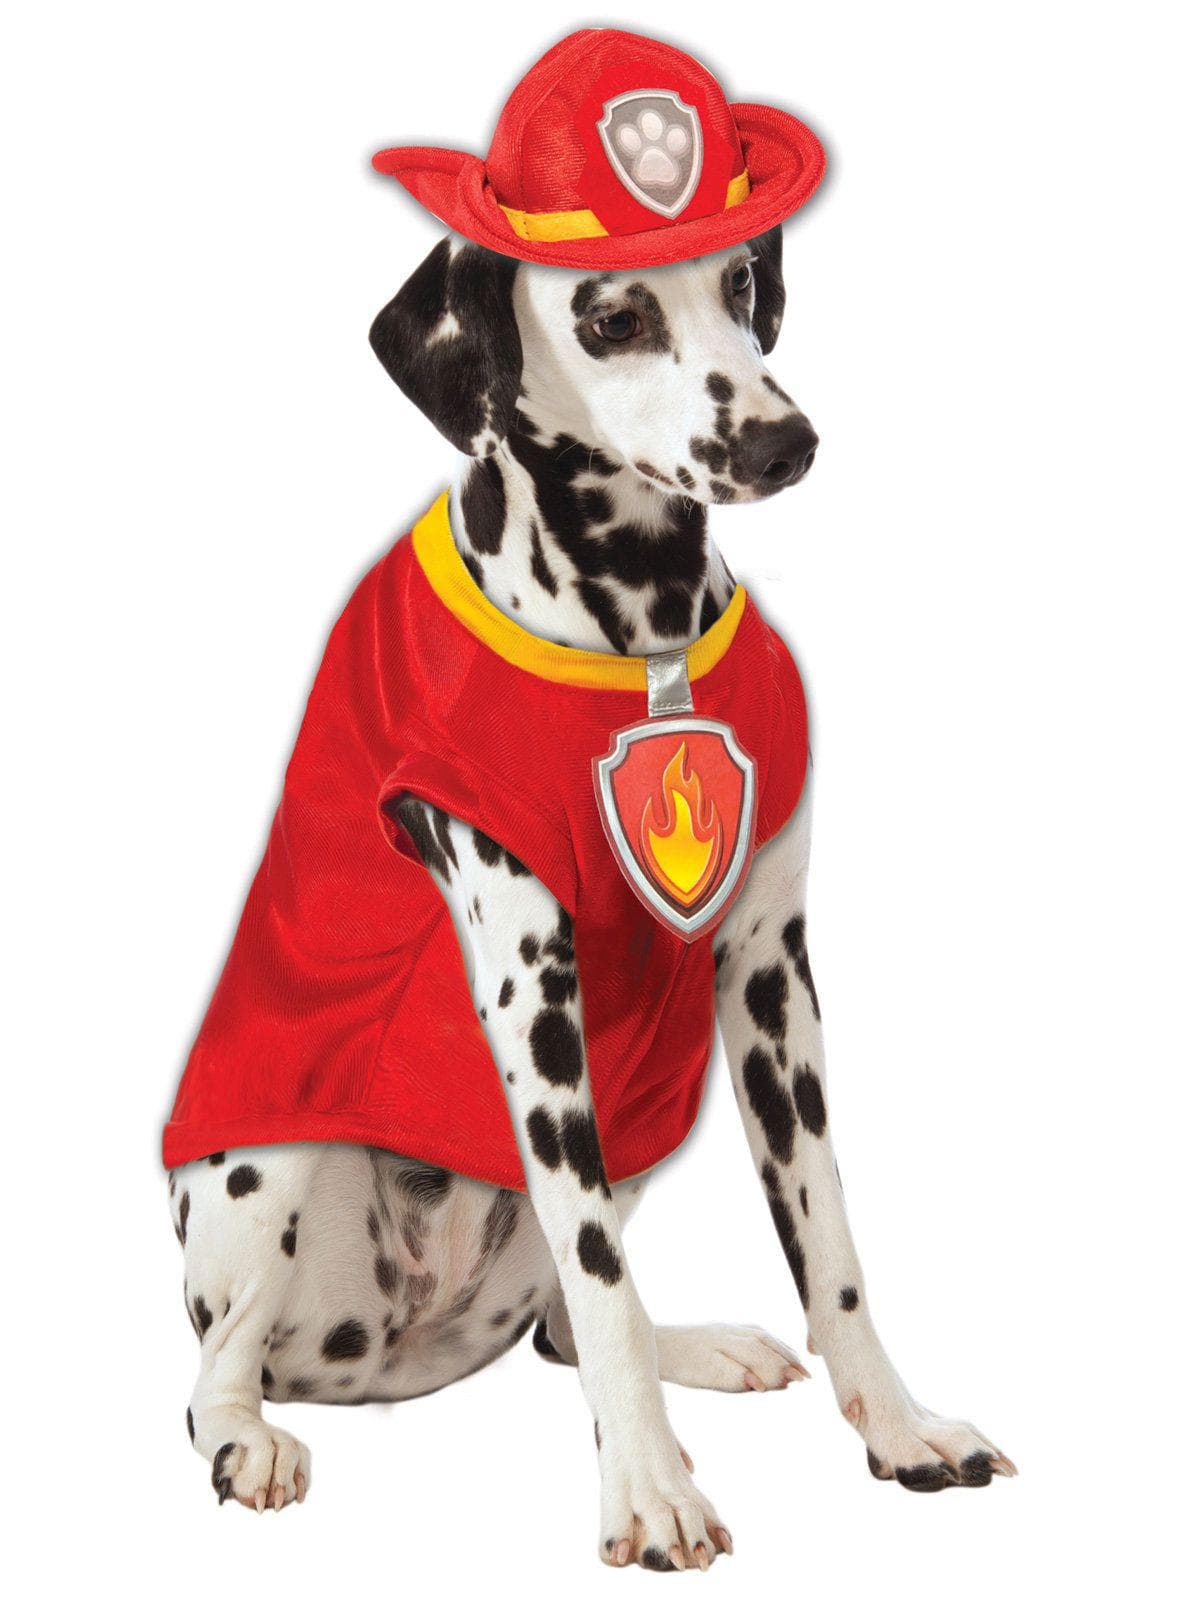 Kids' Nickelodeon PAW Patrol Marshall Red Jumpsuit with Hat Halloween  Costume, Assorted Sizes